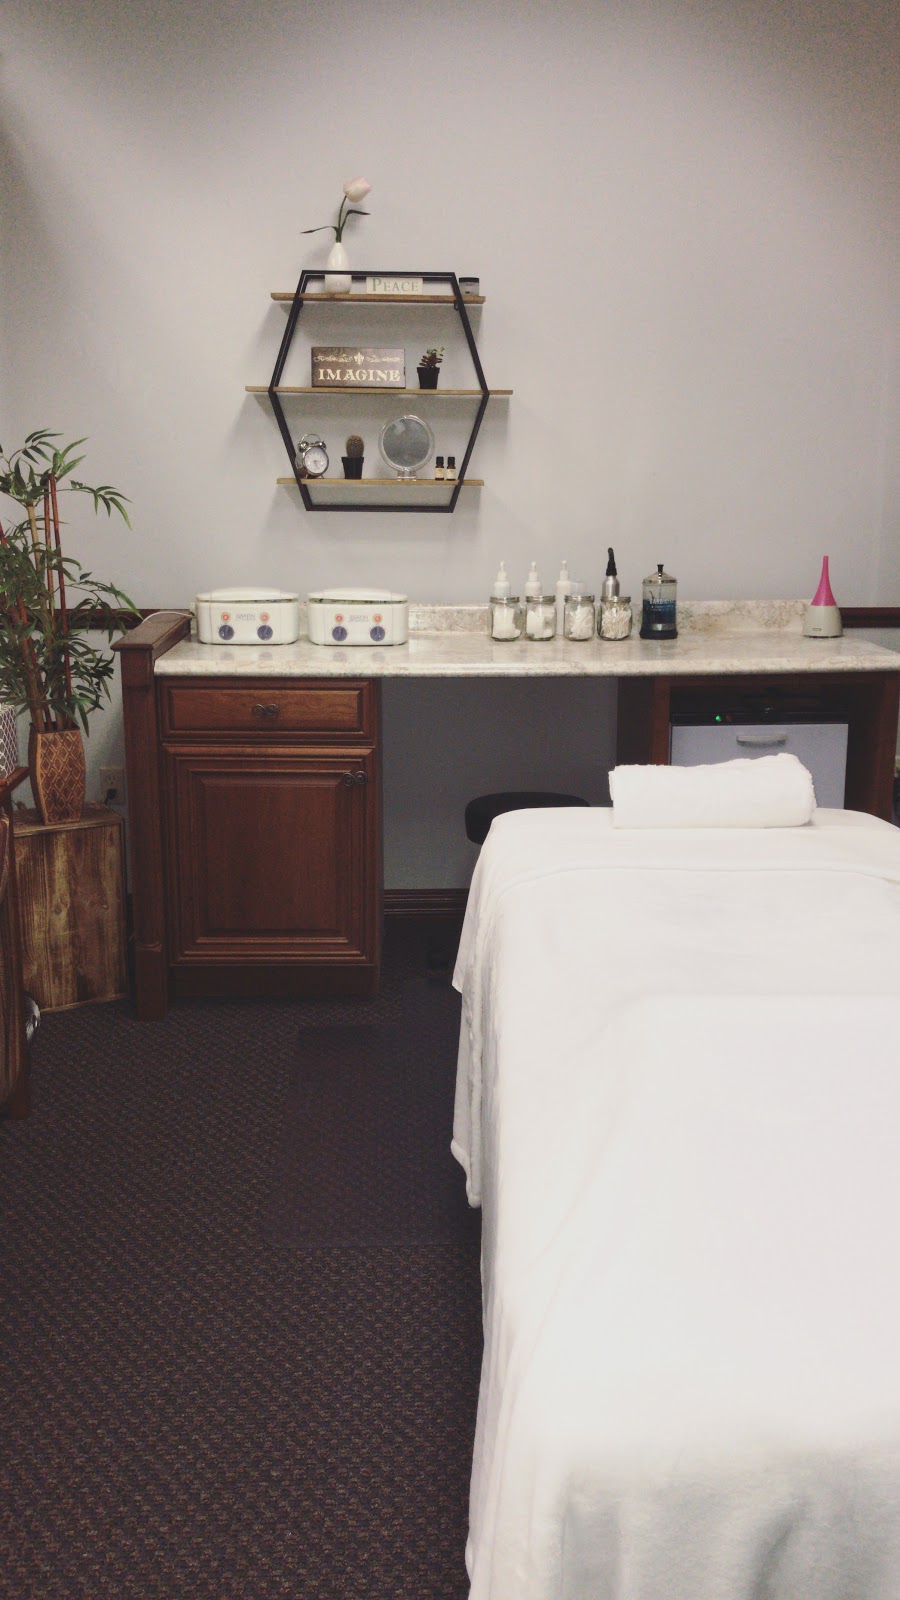 Esthetics by Katelyn [Skincare, Waxing, Tanning] | 210 OConnor Dr Suite 102, Elkhorn, WI 53121, USA | Phone: (262) 723-3299